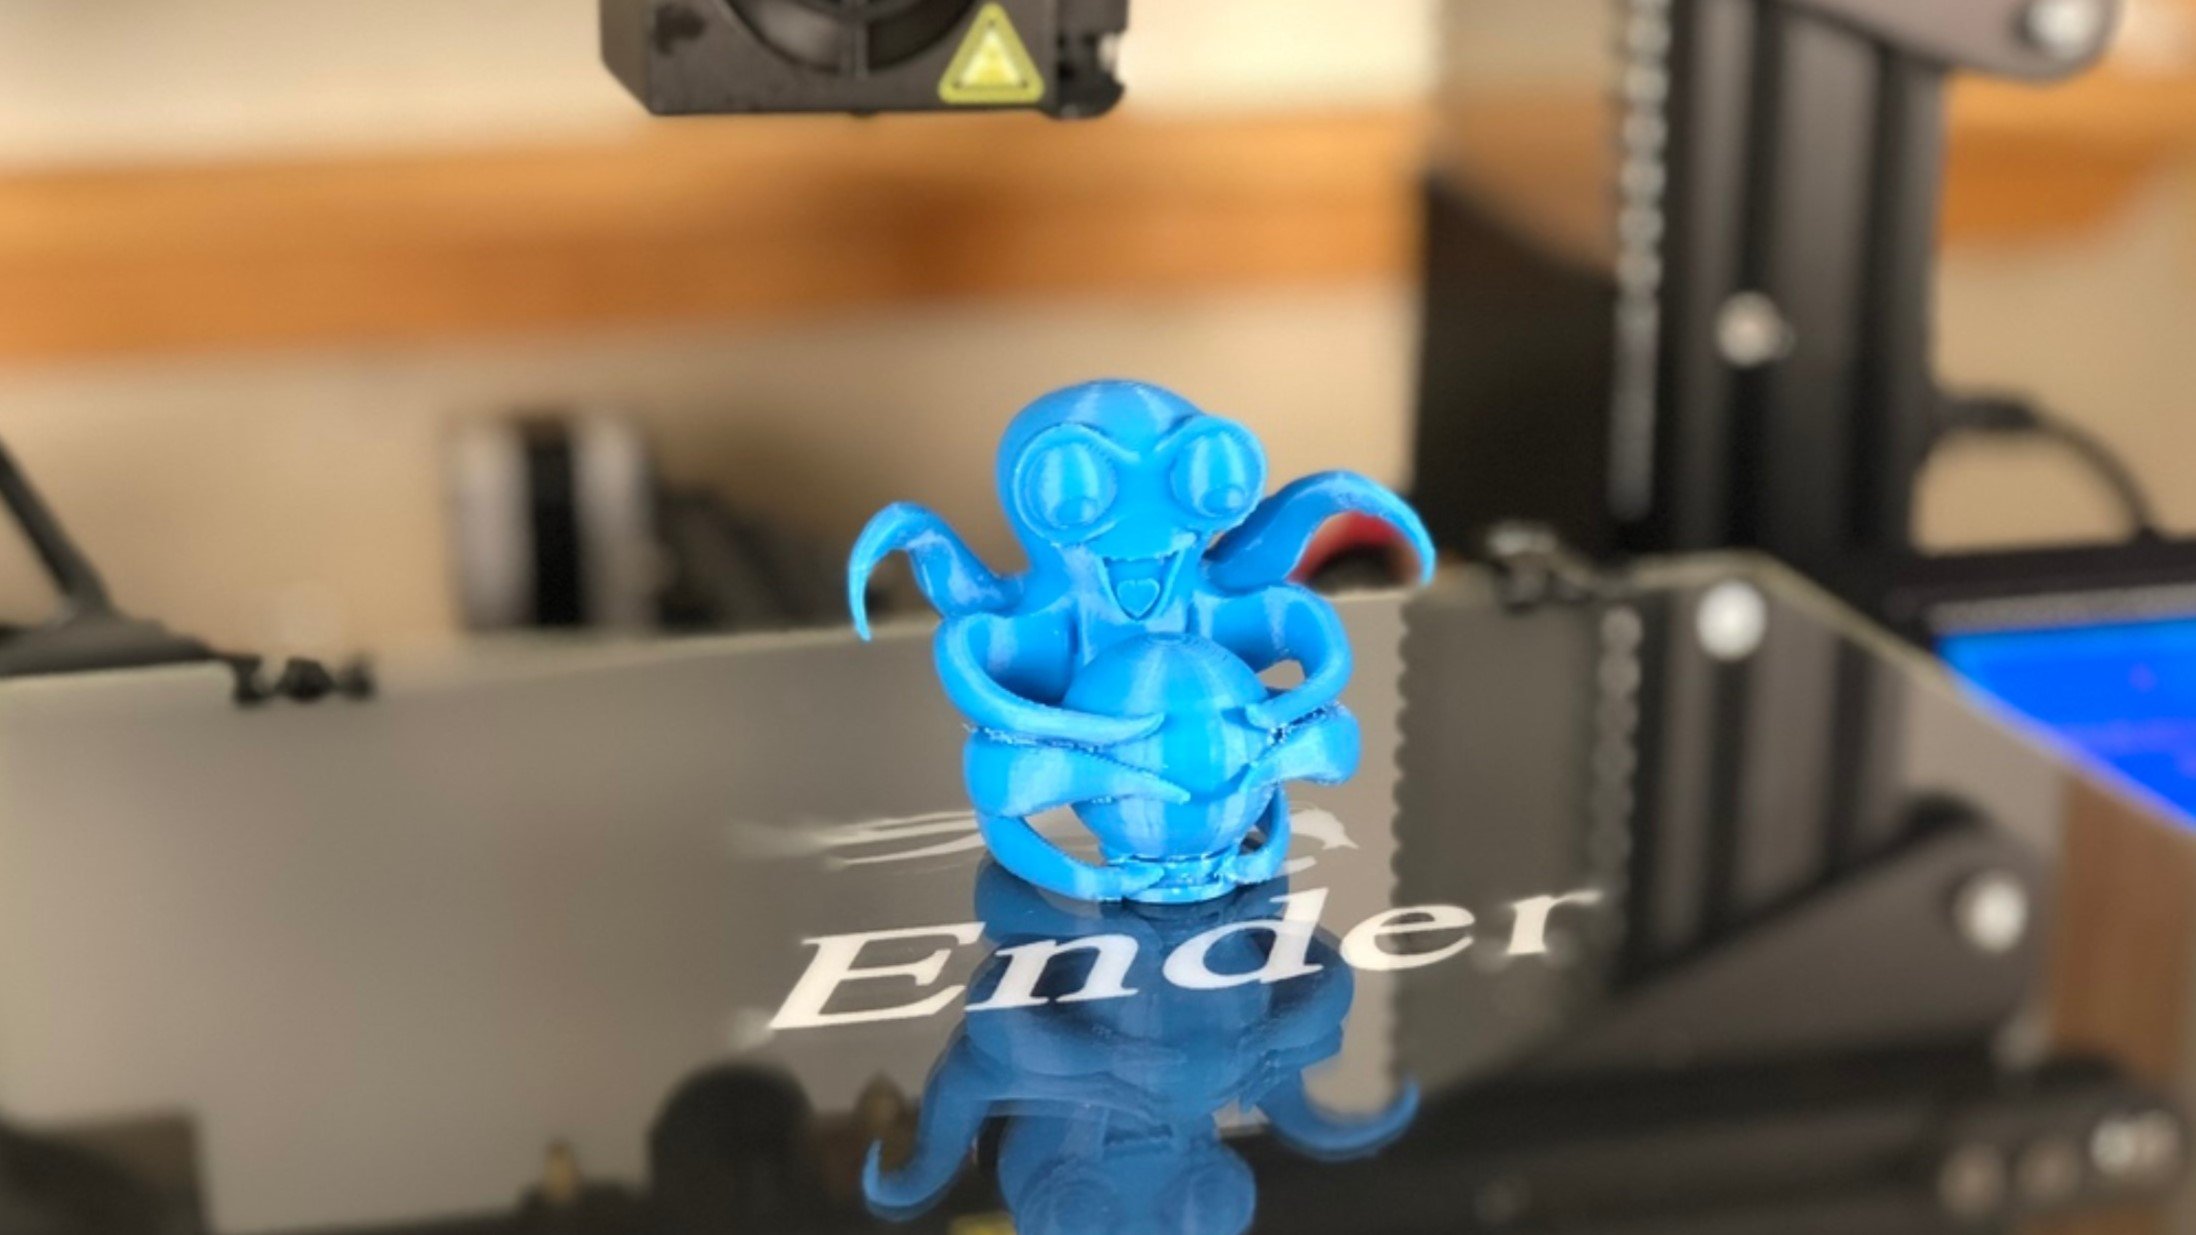 Bed leveling in octoprint slicer - Get Help - OctoPrint Community